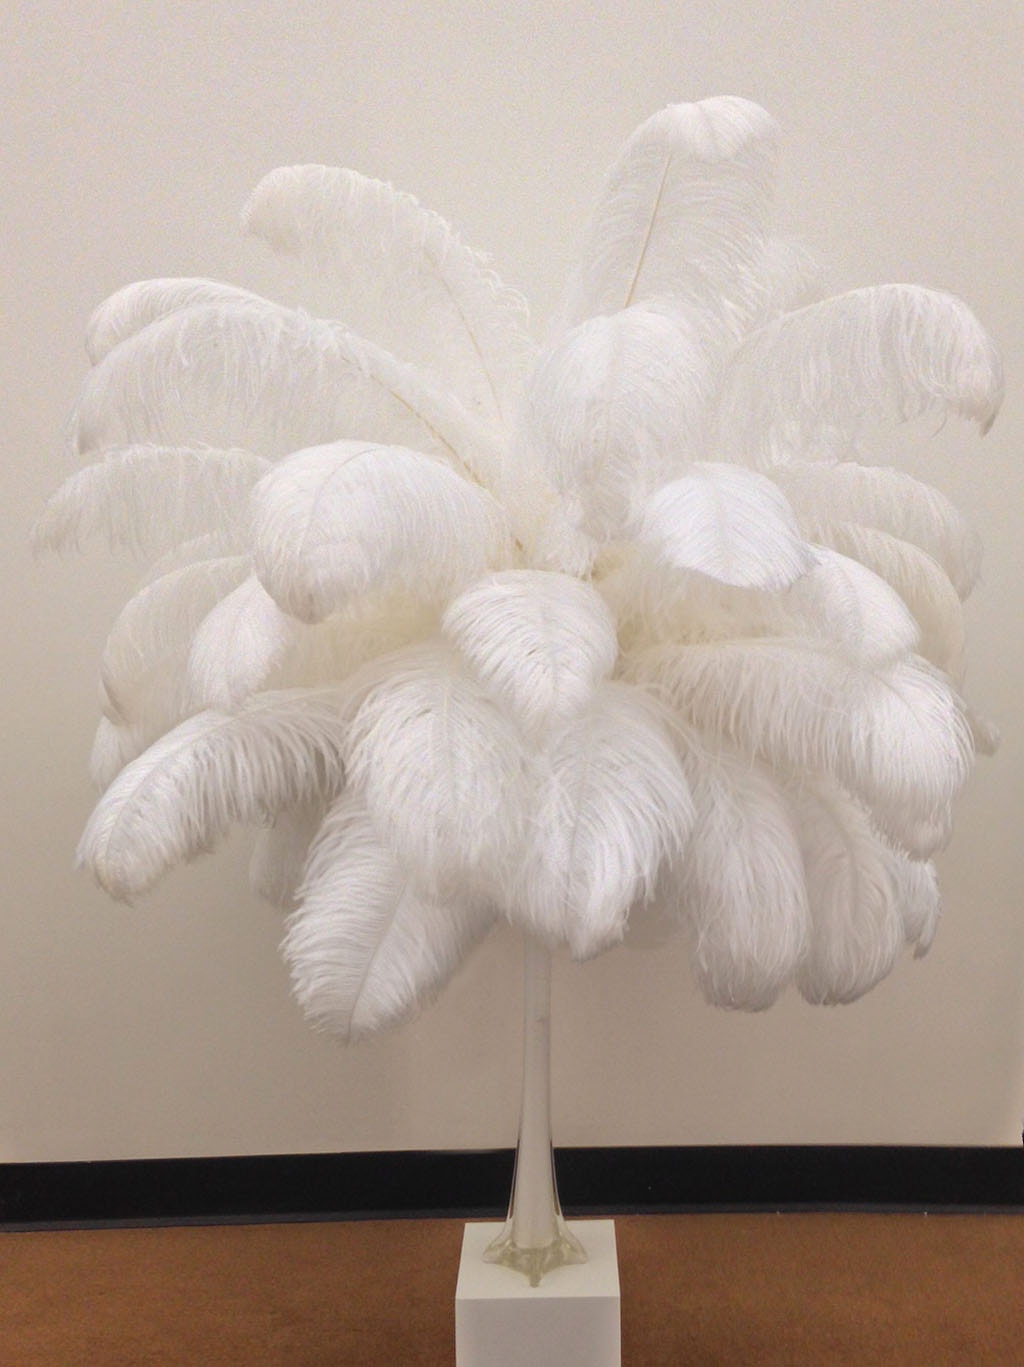 Large Ostrich Feathers - 20-25" Prime Femina Plumes - Champagne